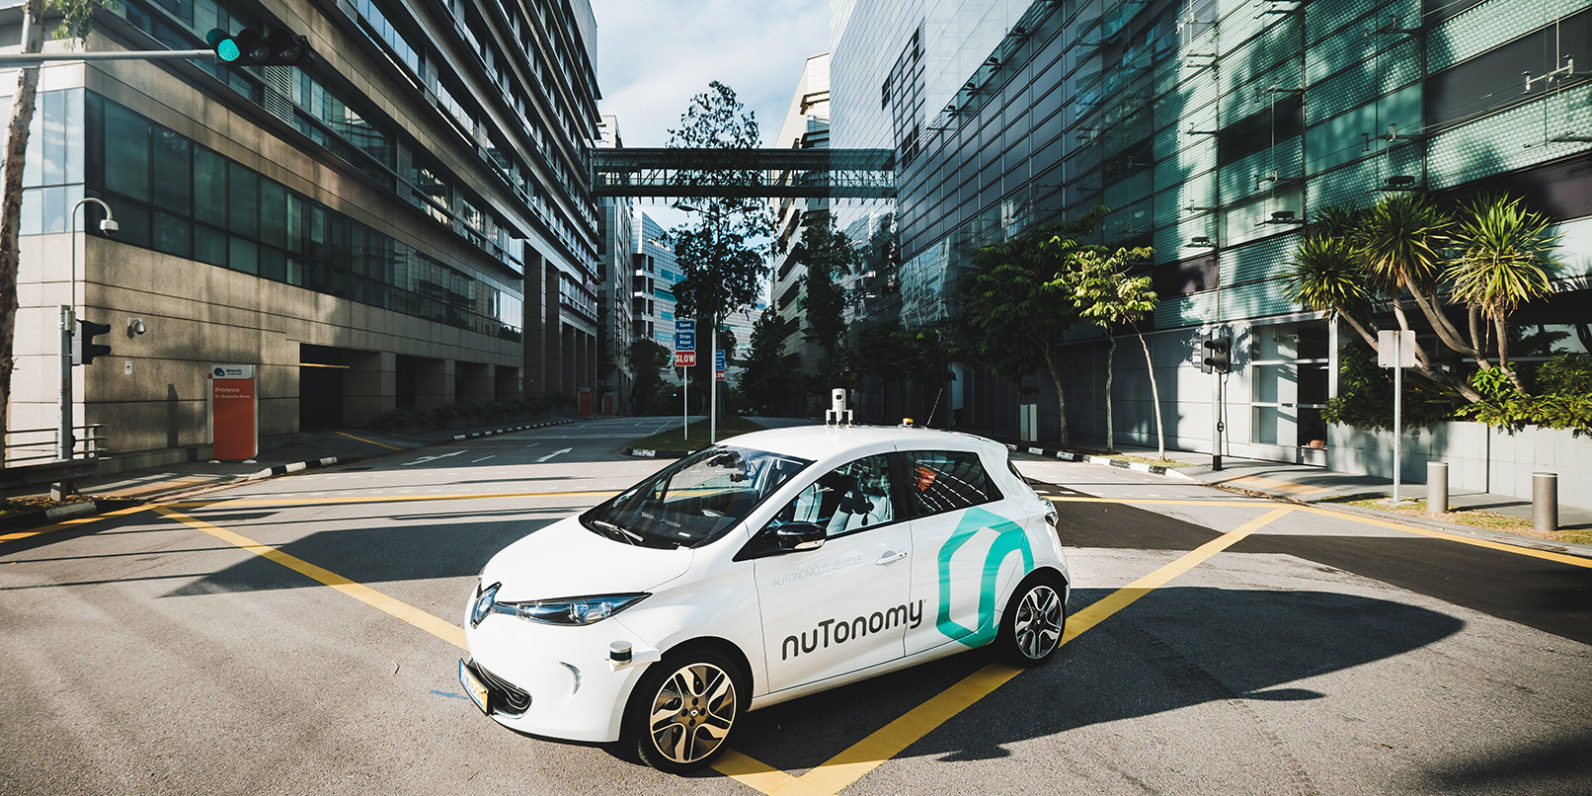 nuTonomy beats Uber to self-driving taxis